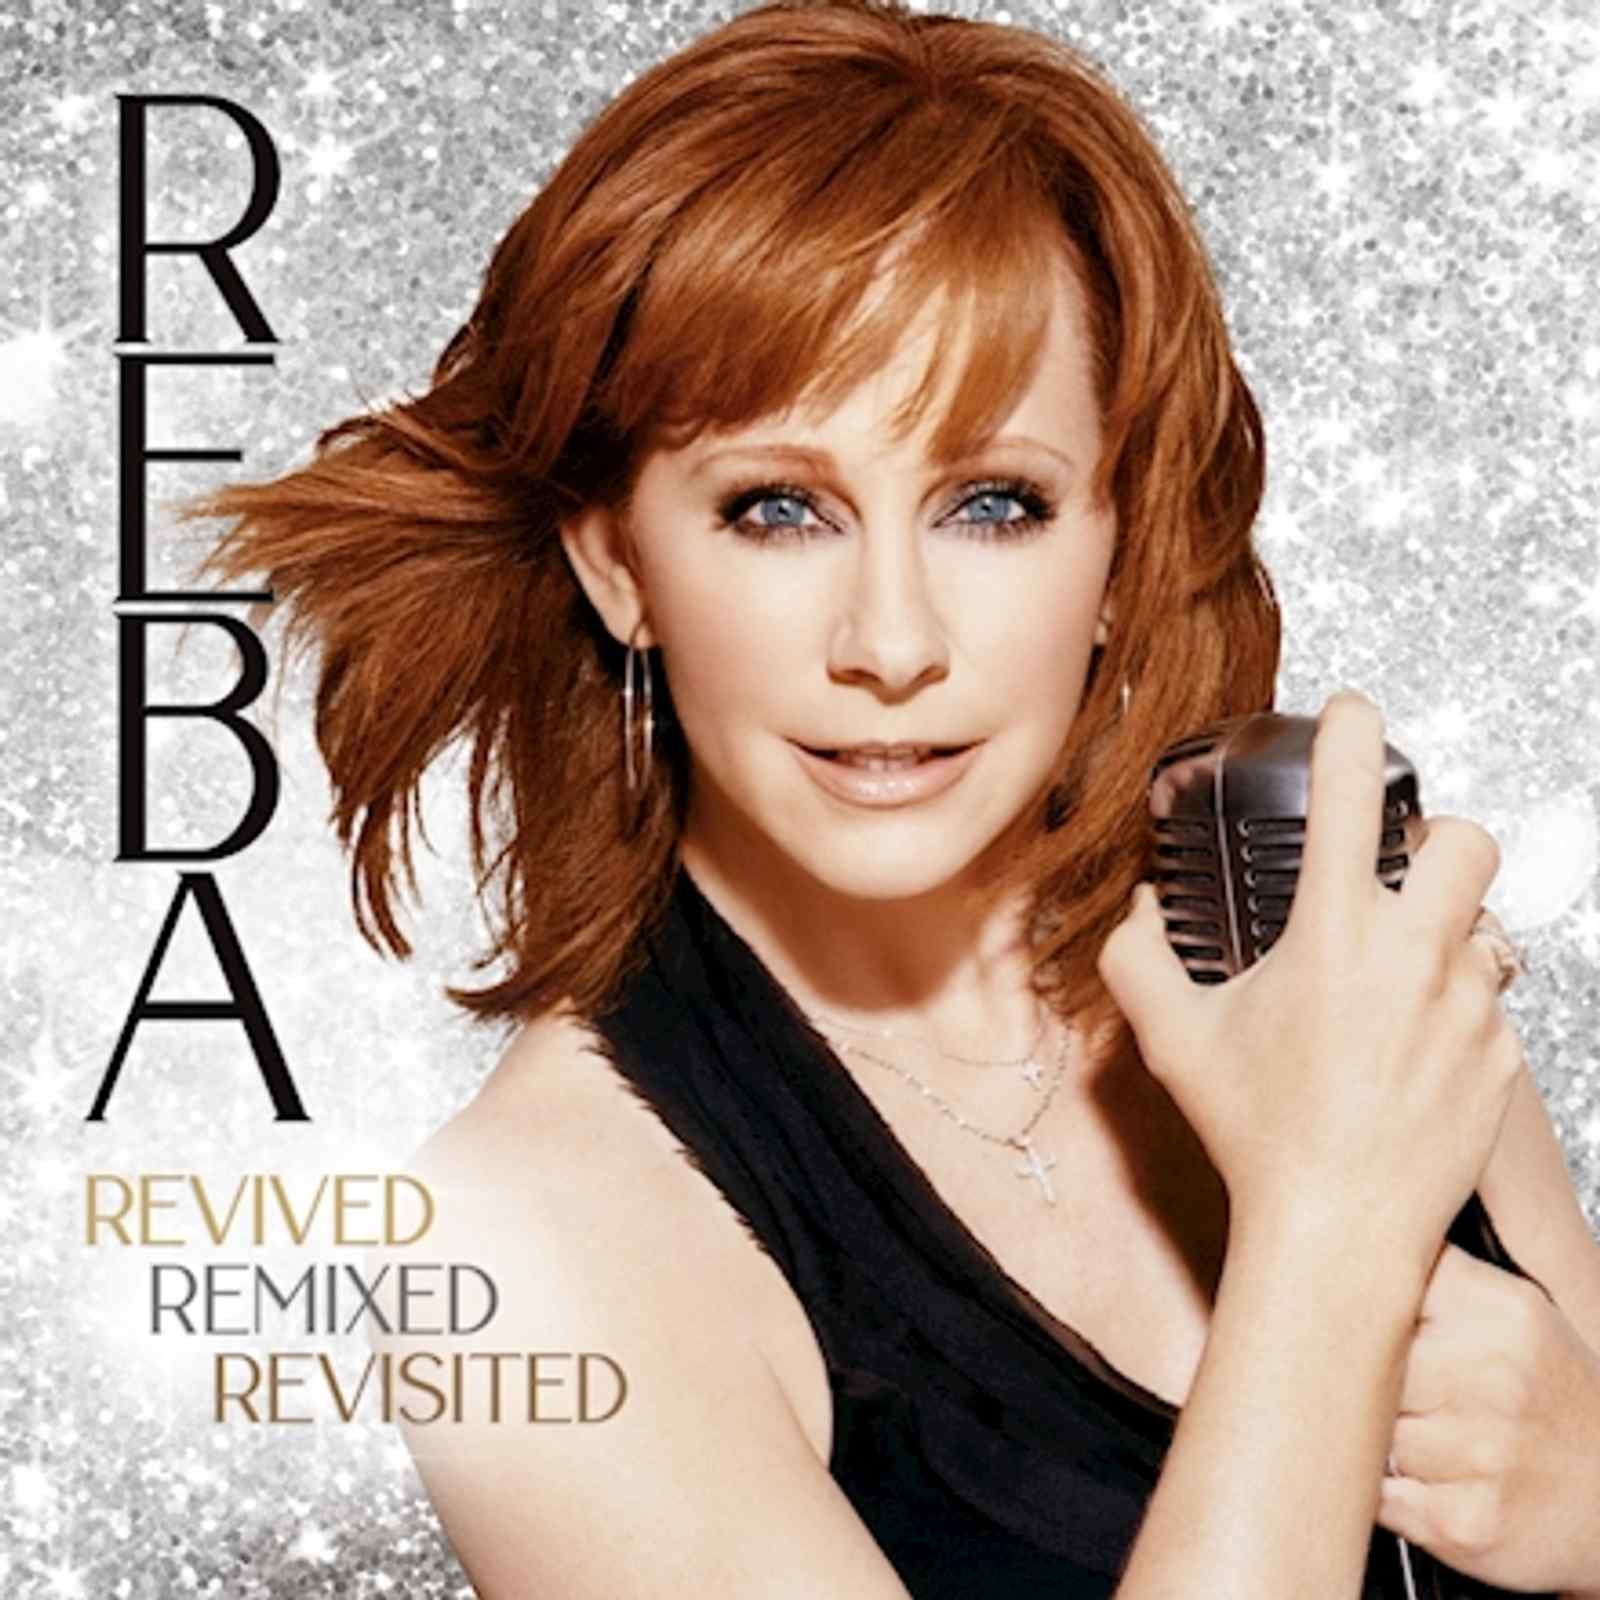 Revised Remixed Revisited by Reba McEntire